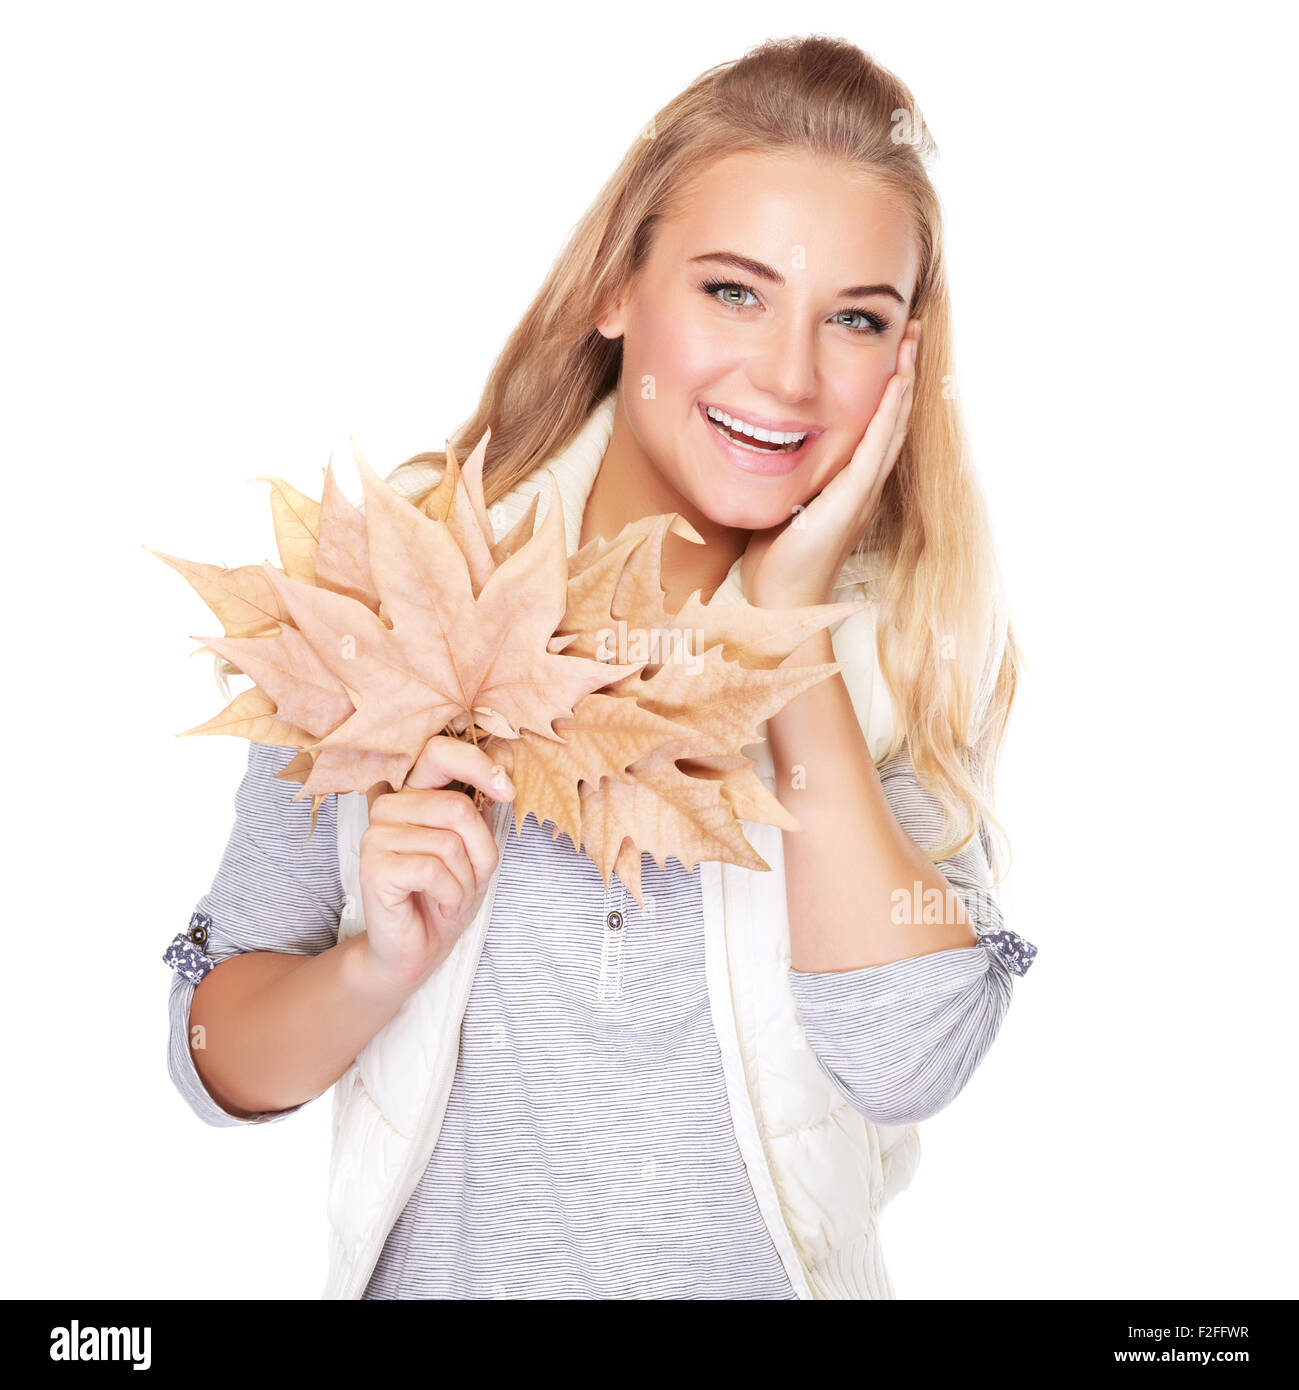 Portrait of beautiful blond woman with dry leaves bouquet isolated on white background, enjoying autumn season Stock Photo